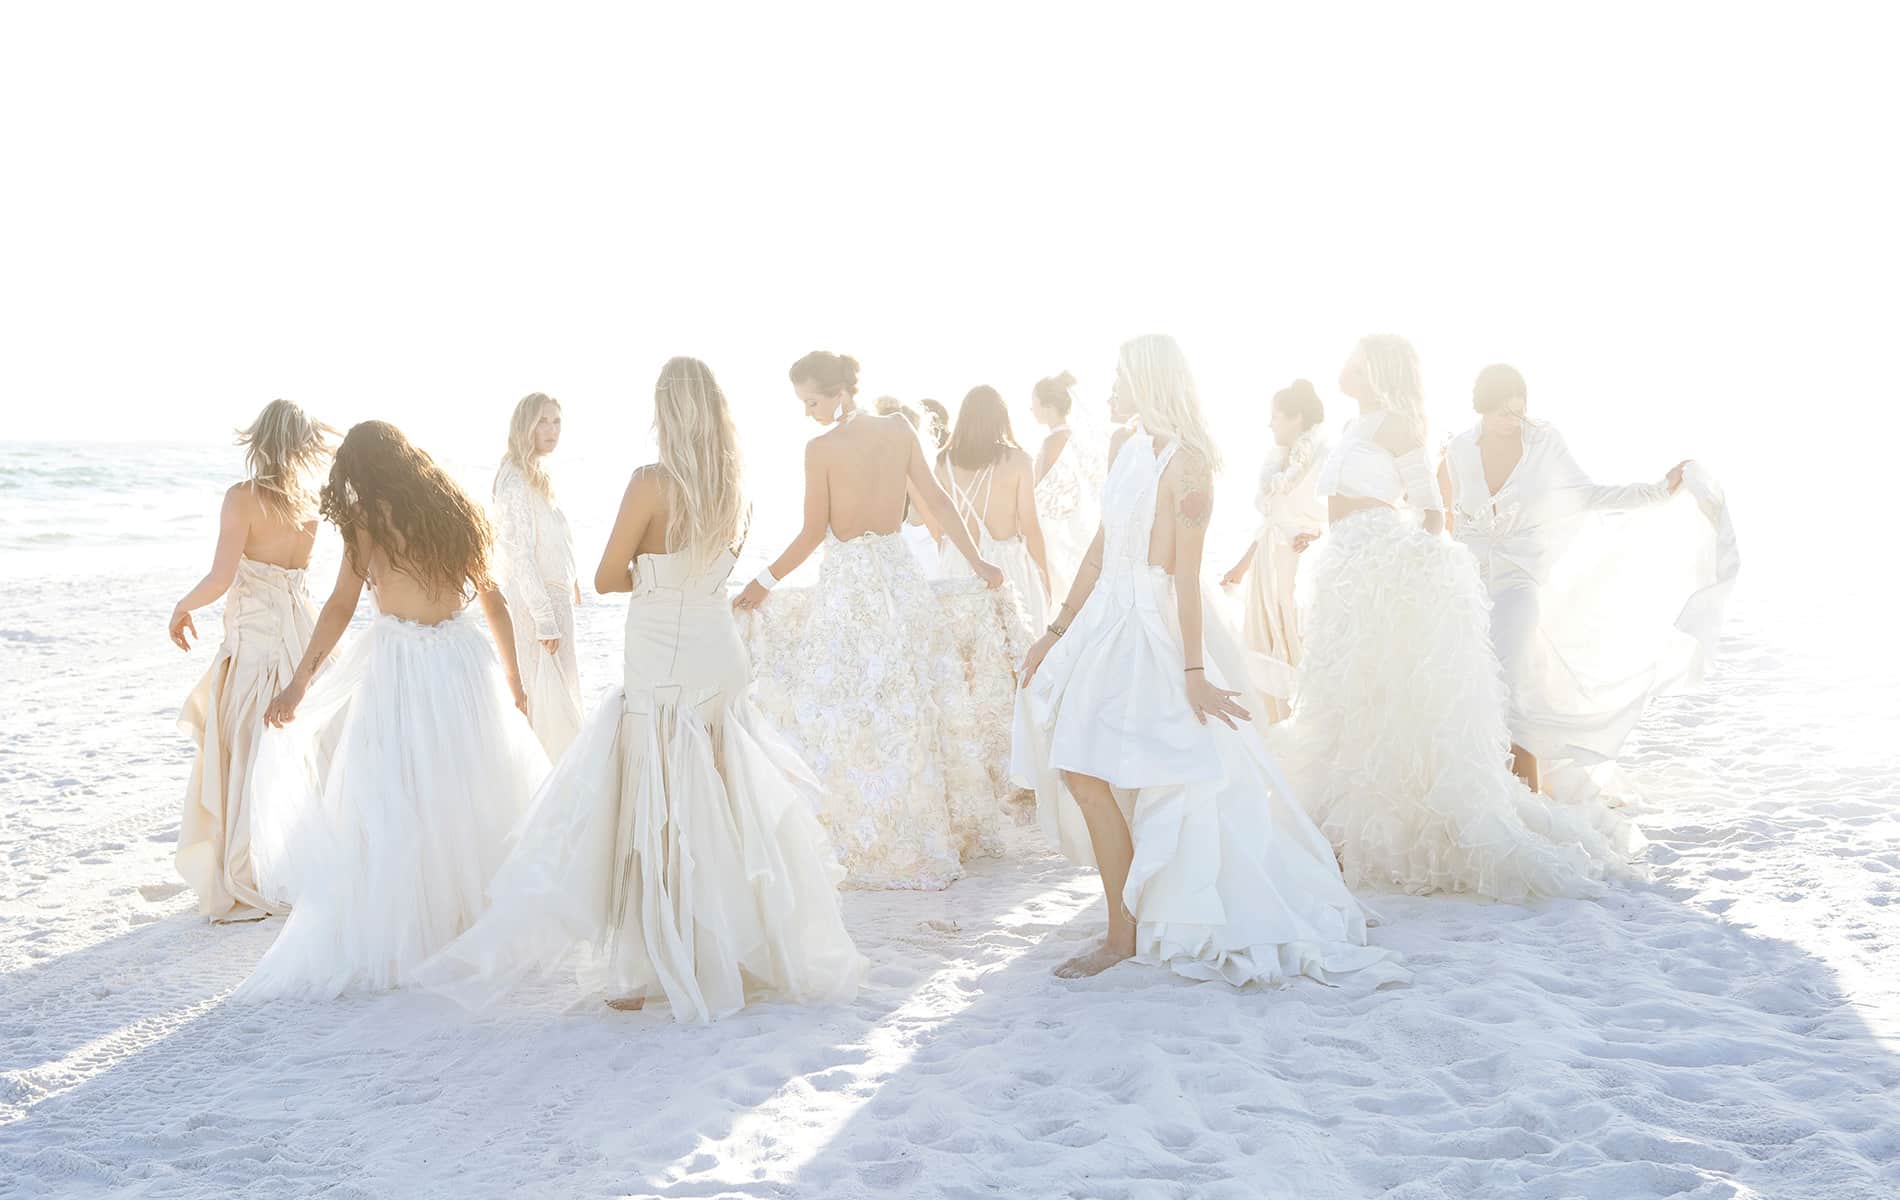 Nicole Paloma Bridal, group shot of models in wedding gowns on the beach